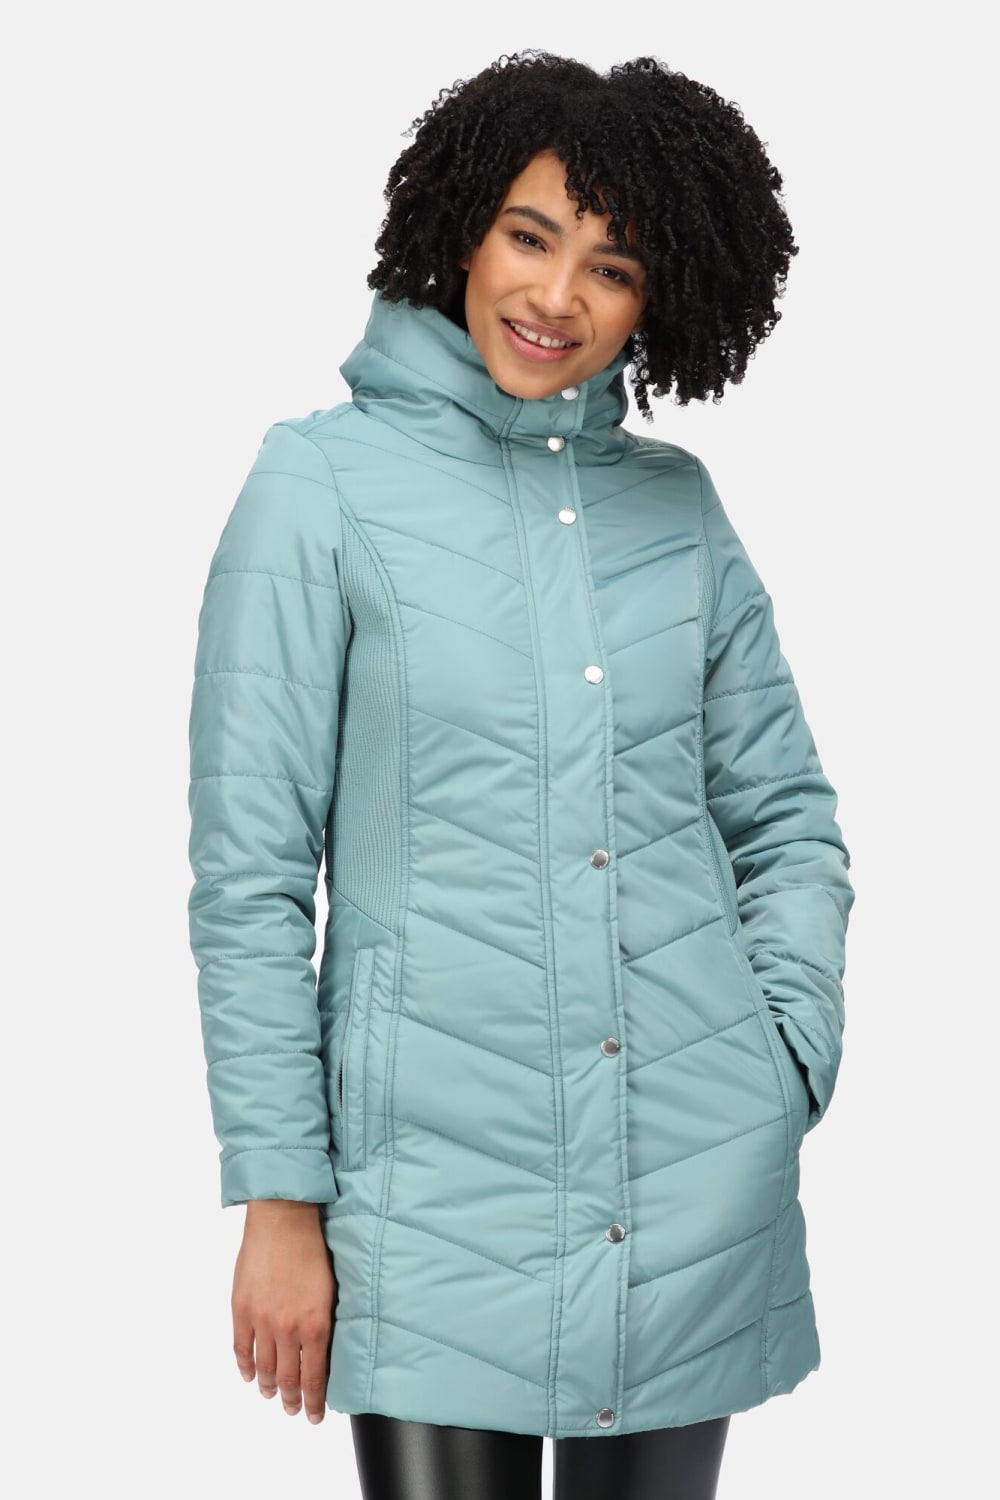 Womens Parthenia Rochelle Humes Insulated Parka Jacket - Ivy Moss